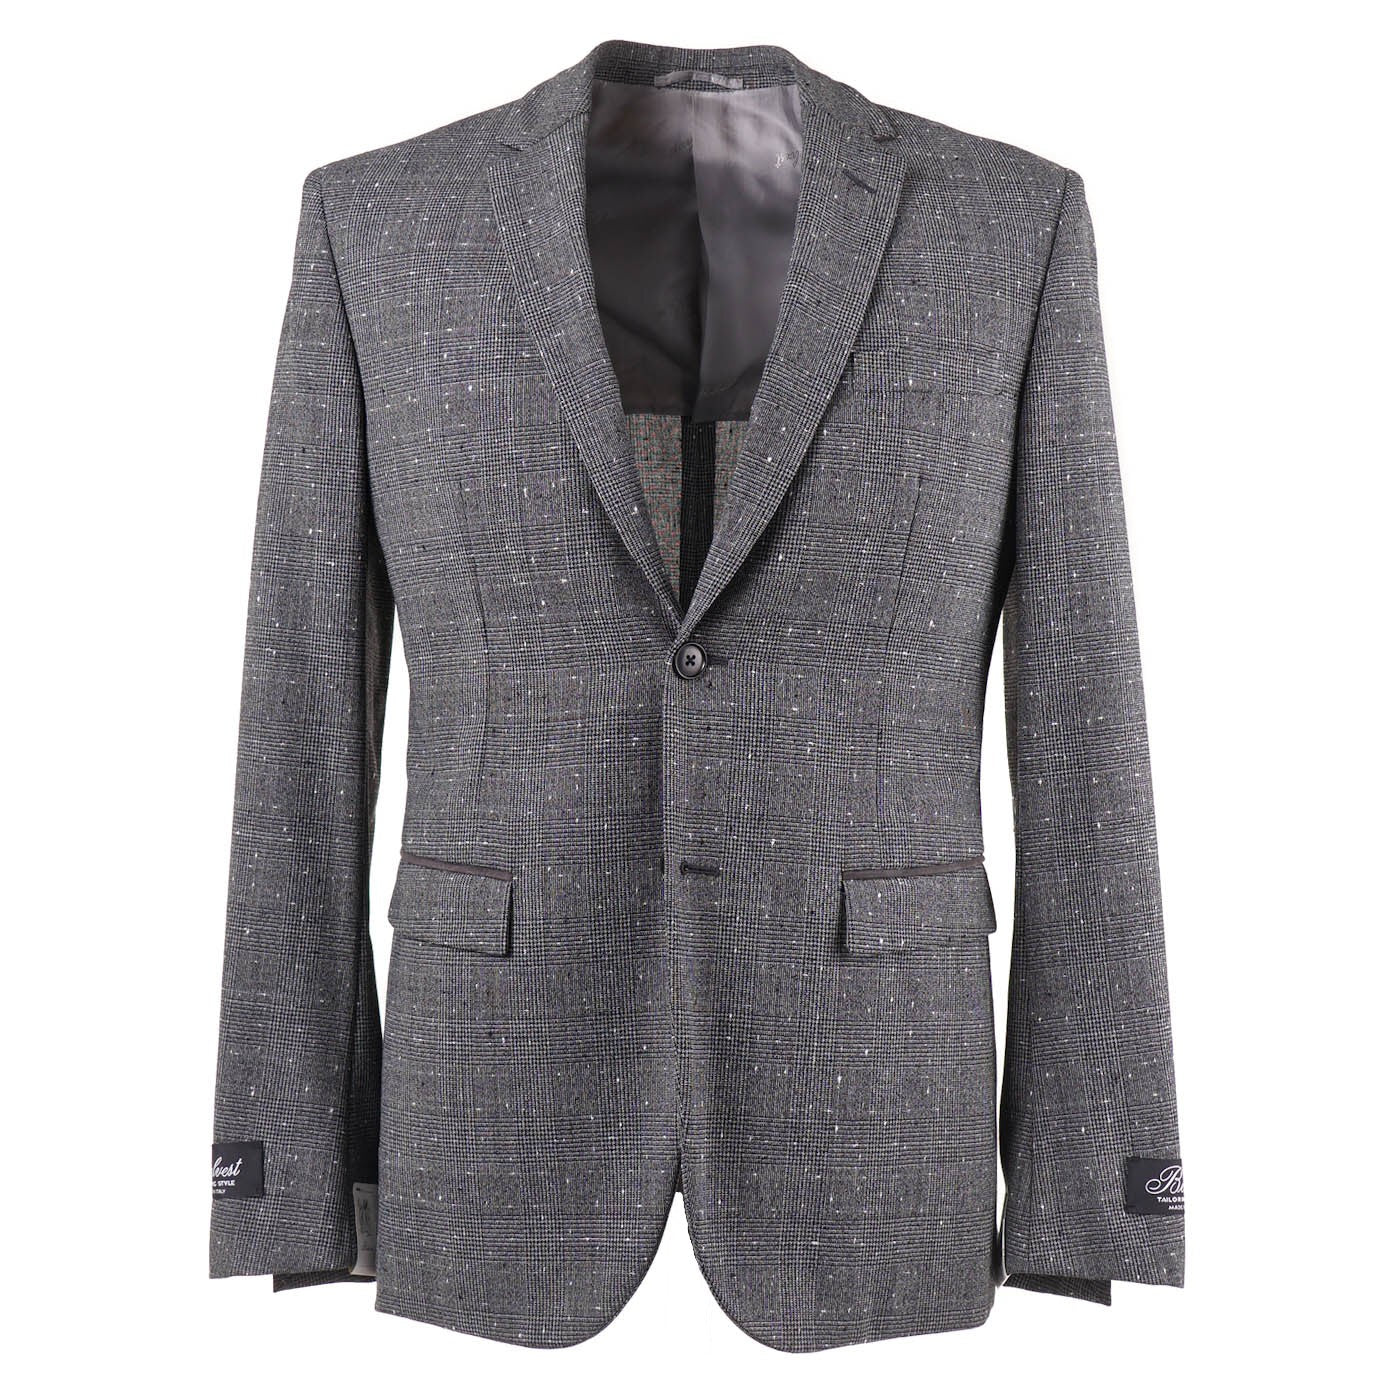 Belvest Wool Suit with Leather Details - Top Shelf Apparel